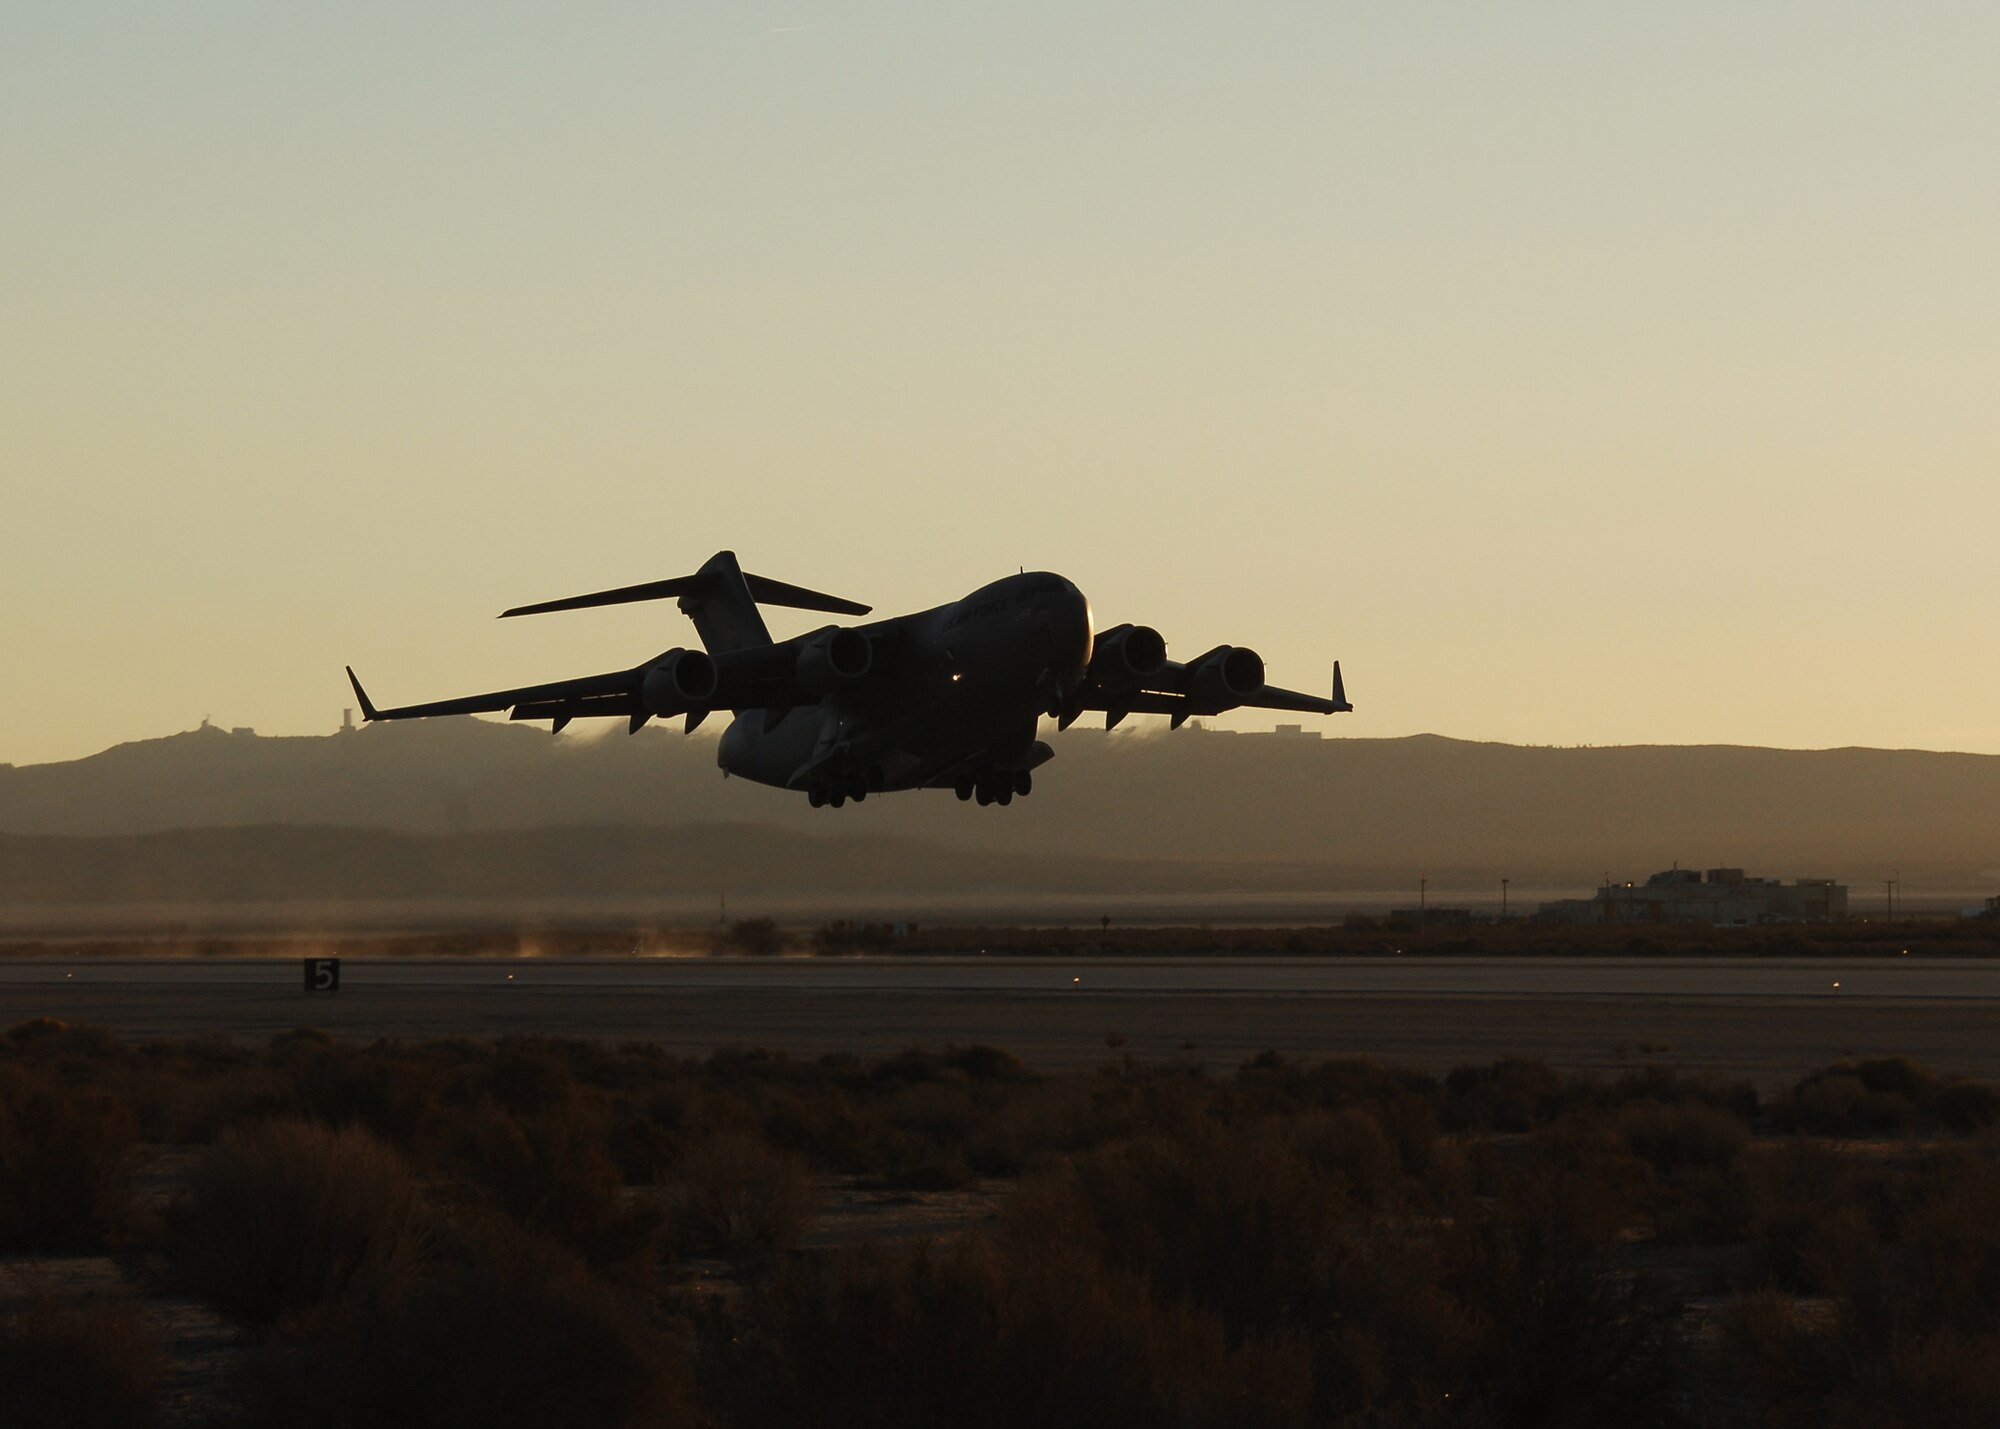 A C-17 Globemaster III takes off from Edwards Air Force Base, Calif., on Oct. 19. The early-morning flight marked the first flight of the C-17 using a Fischer-Tropsch synthetic fuel blend in one of its engines. All four engines ran the fuel blend in a test flight here Oct. 22.(Photo by Jim Shryne)